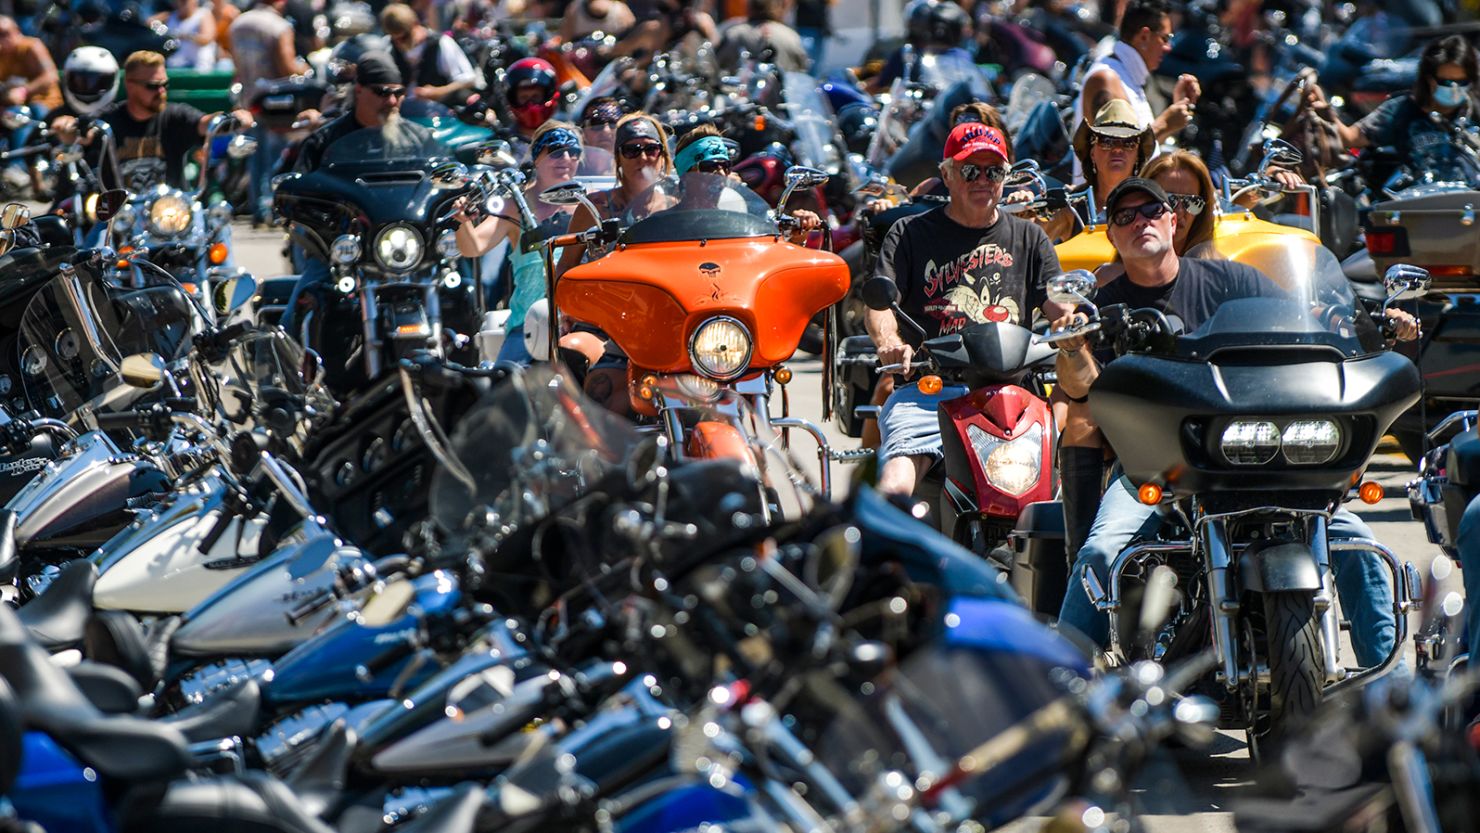 Bikers ride down Main Street at the 80th Annual Sturgis Motorcycle Rally in 2020 in Sturgis, South Dakota. About 450,000 people attended indoor and outdoor activities, despite the pandemic. 